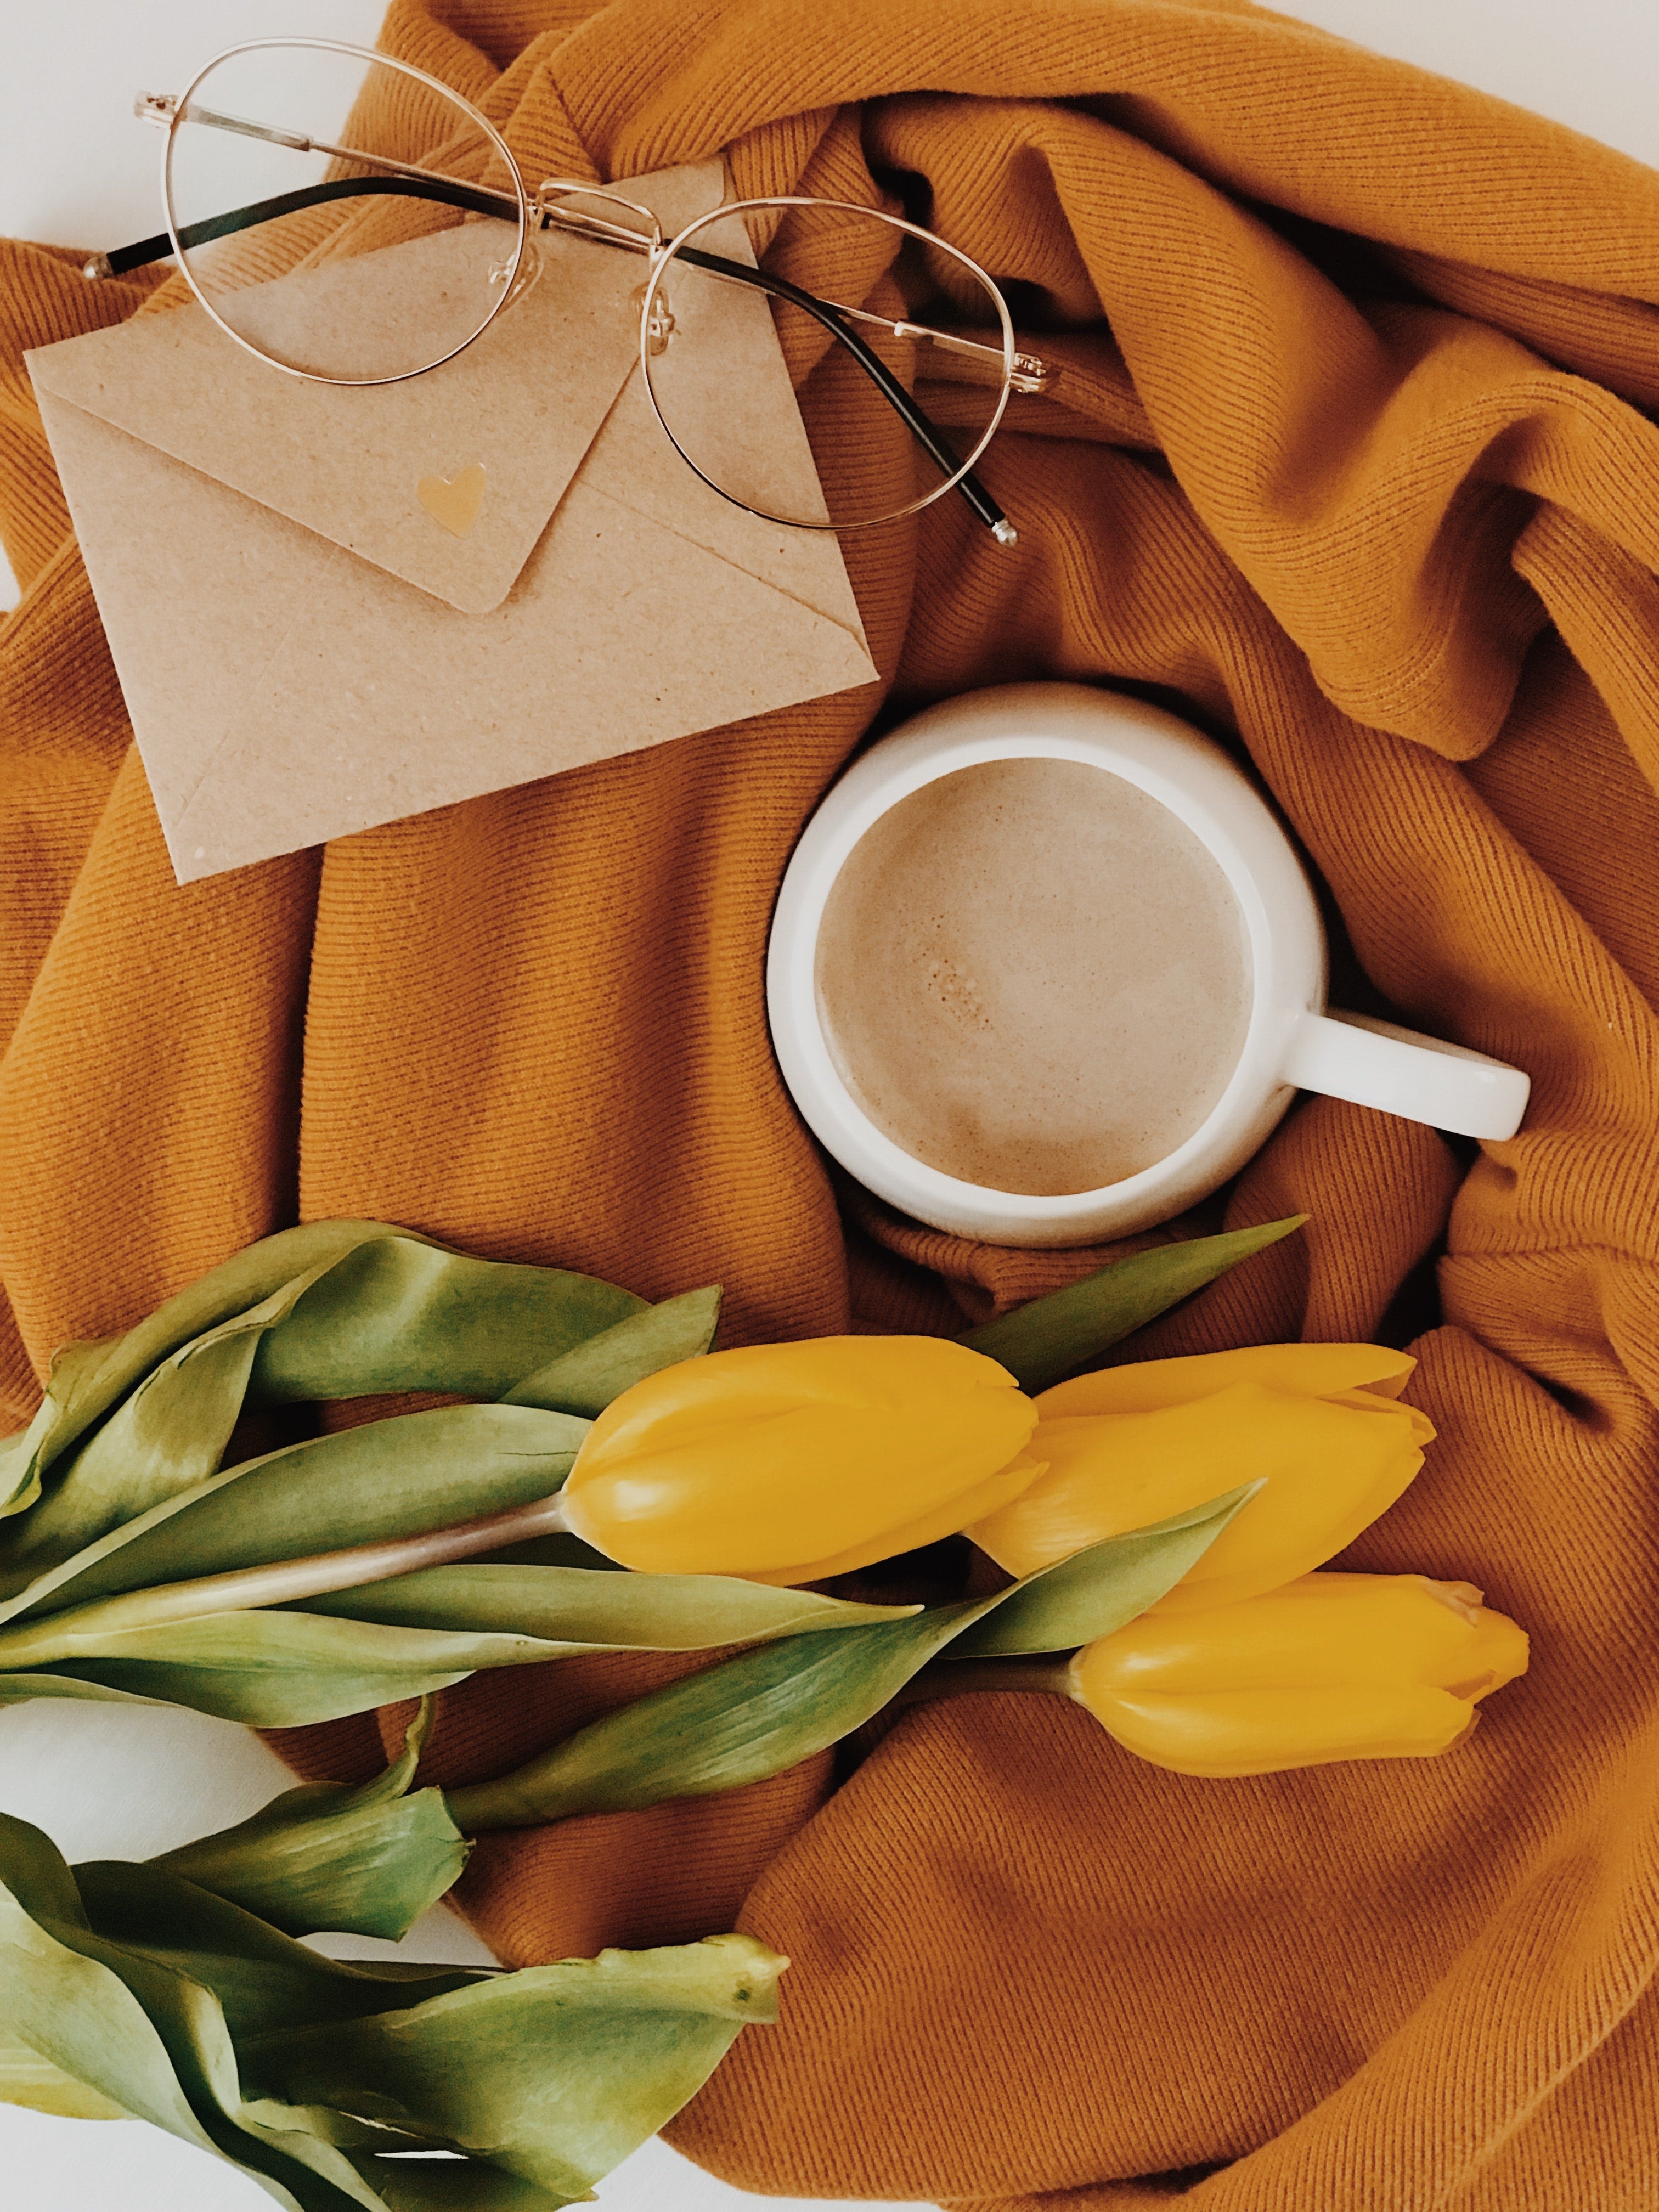 Yellow Tulips, coffee, a tan envelope, and glasses sitting on an orange blanket